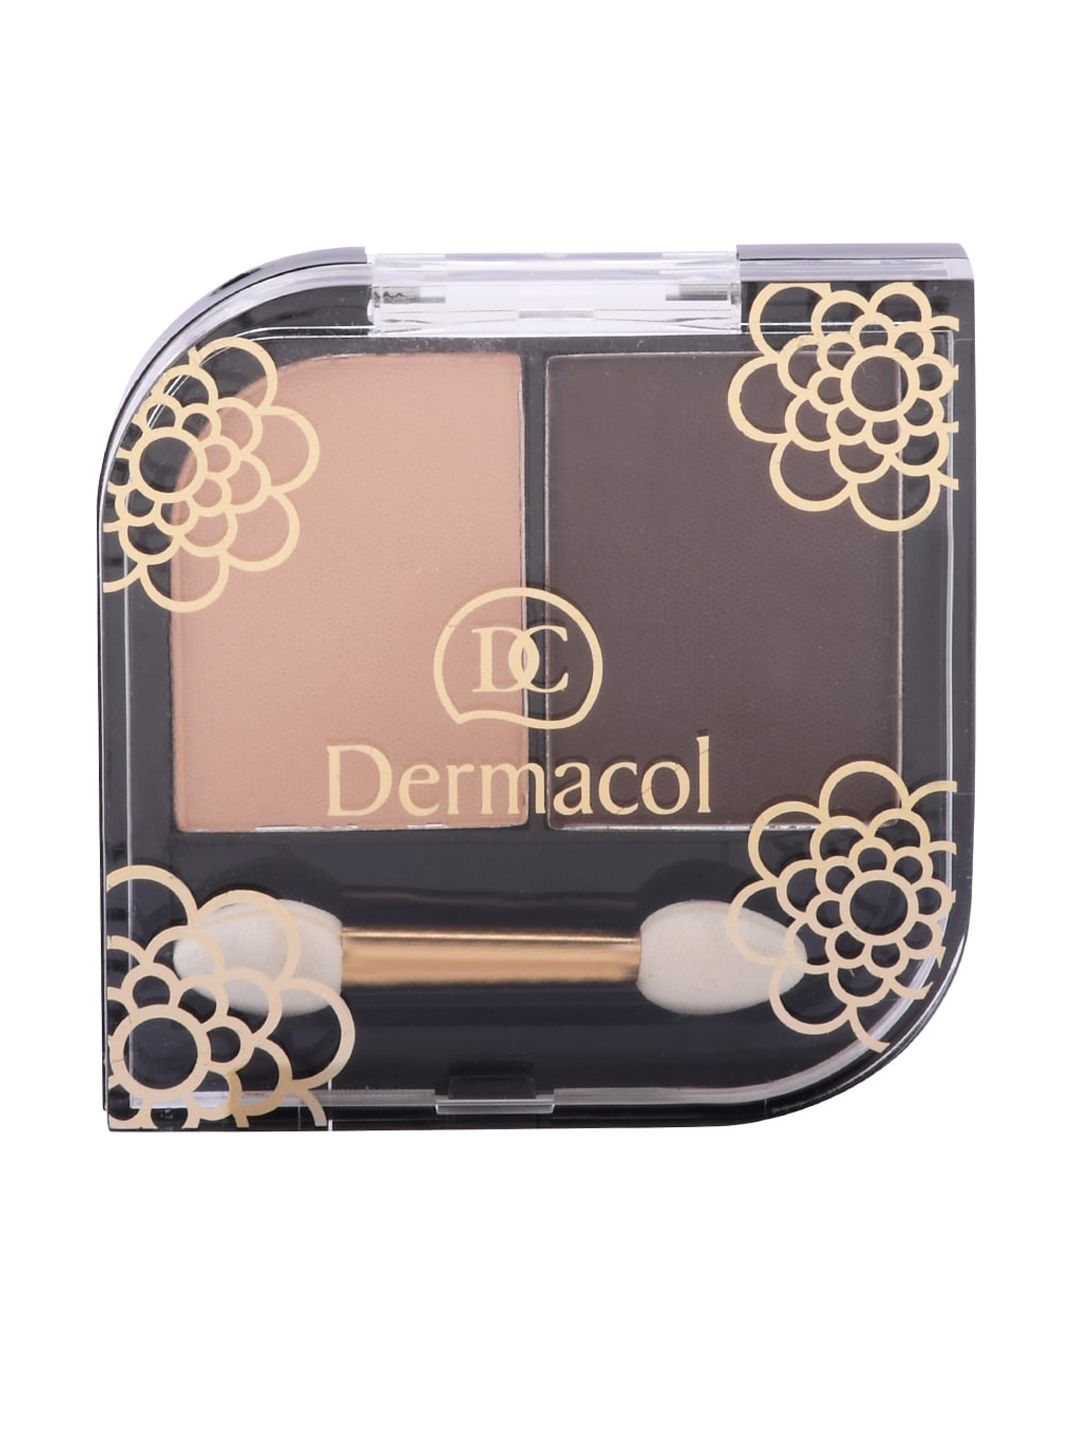 Dermacol Balsam Duo Eye Shadow With Brush 3363 Price in India